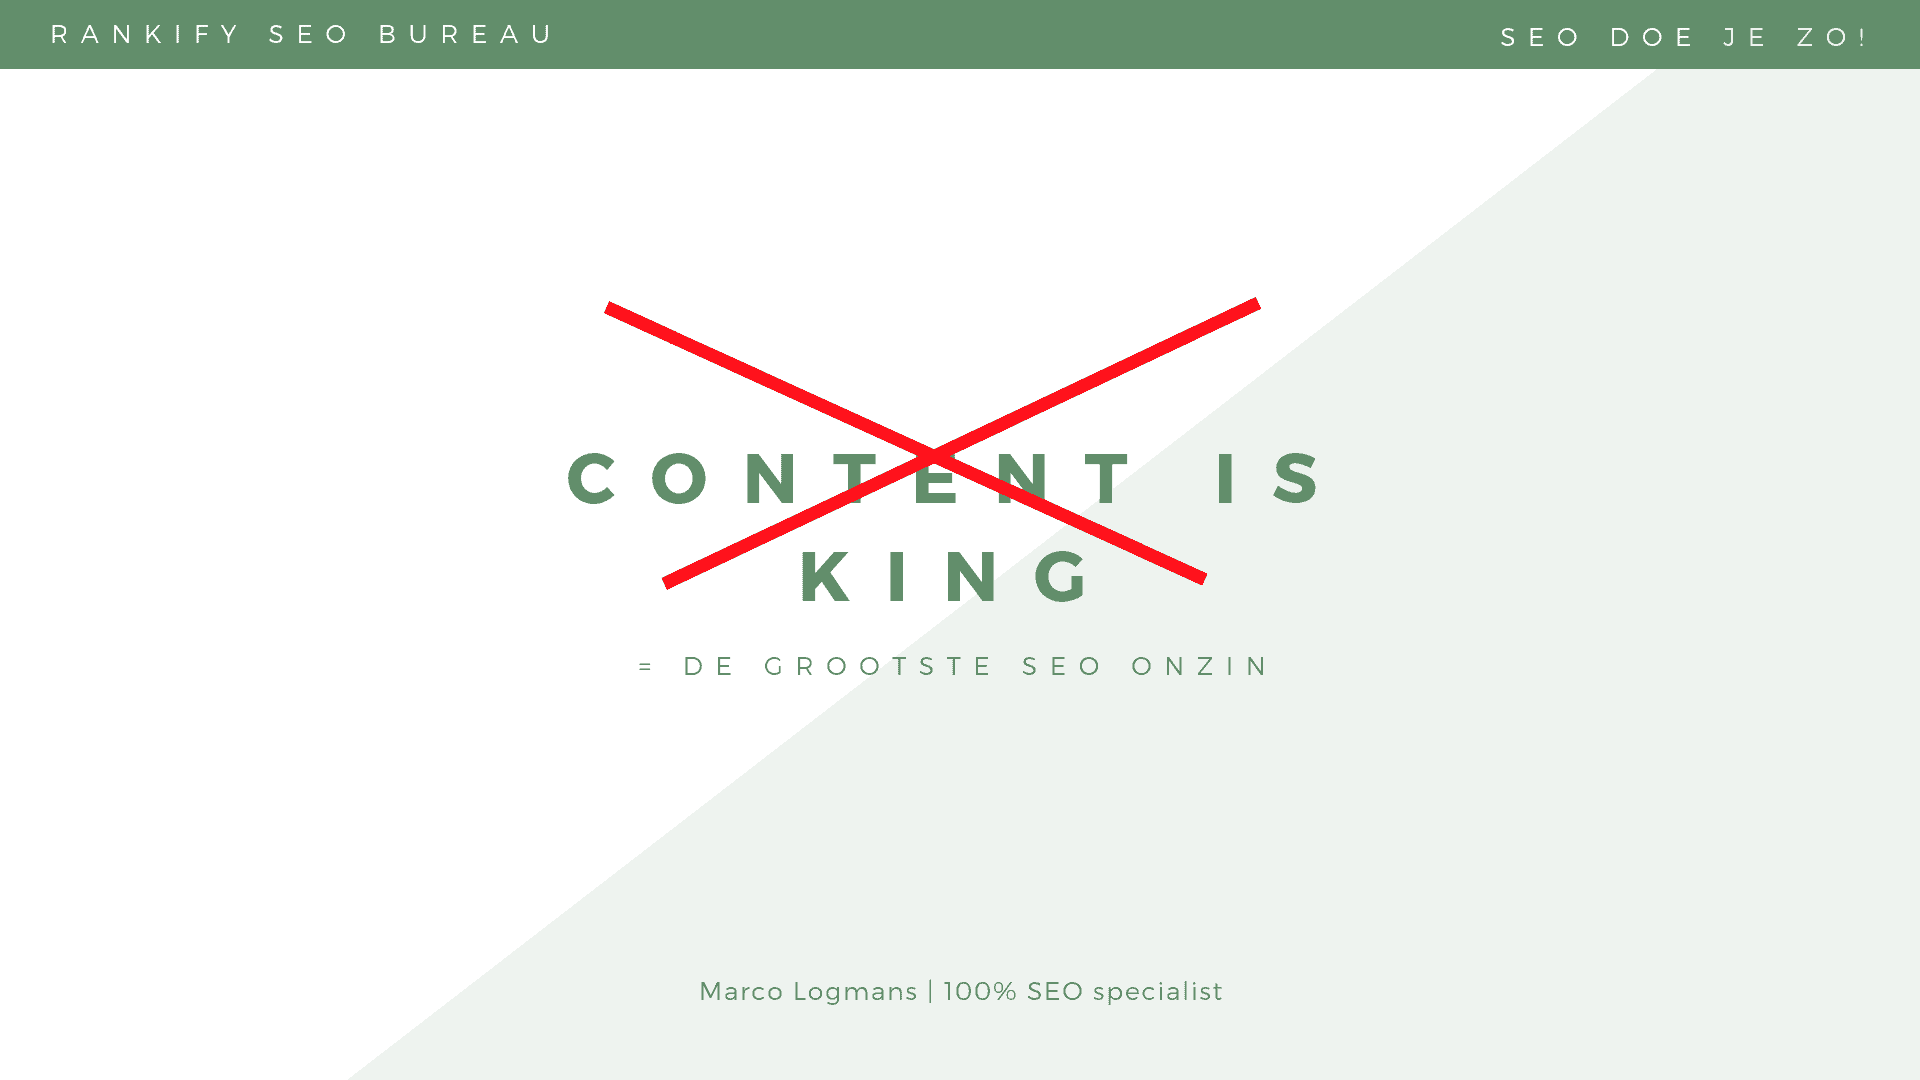 CONTENT IS KING (1)